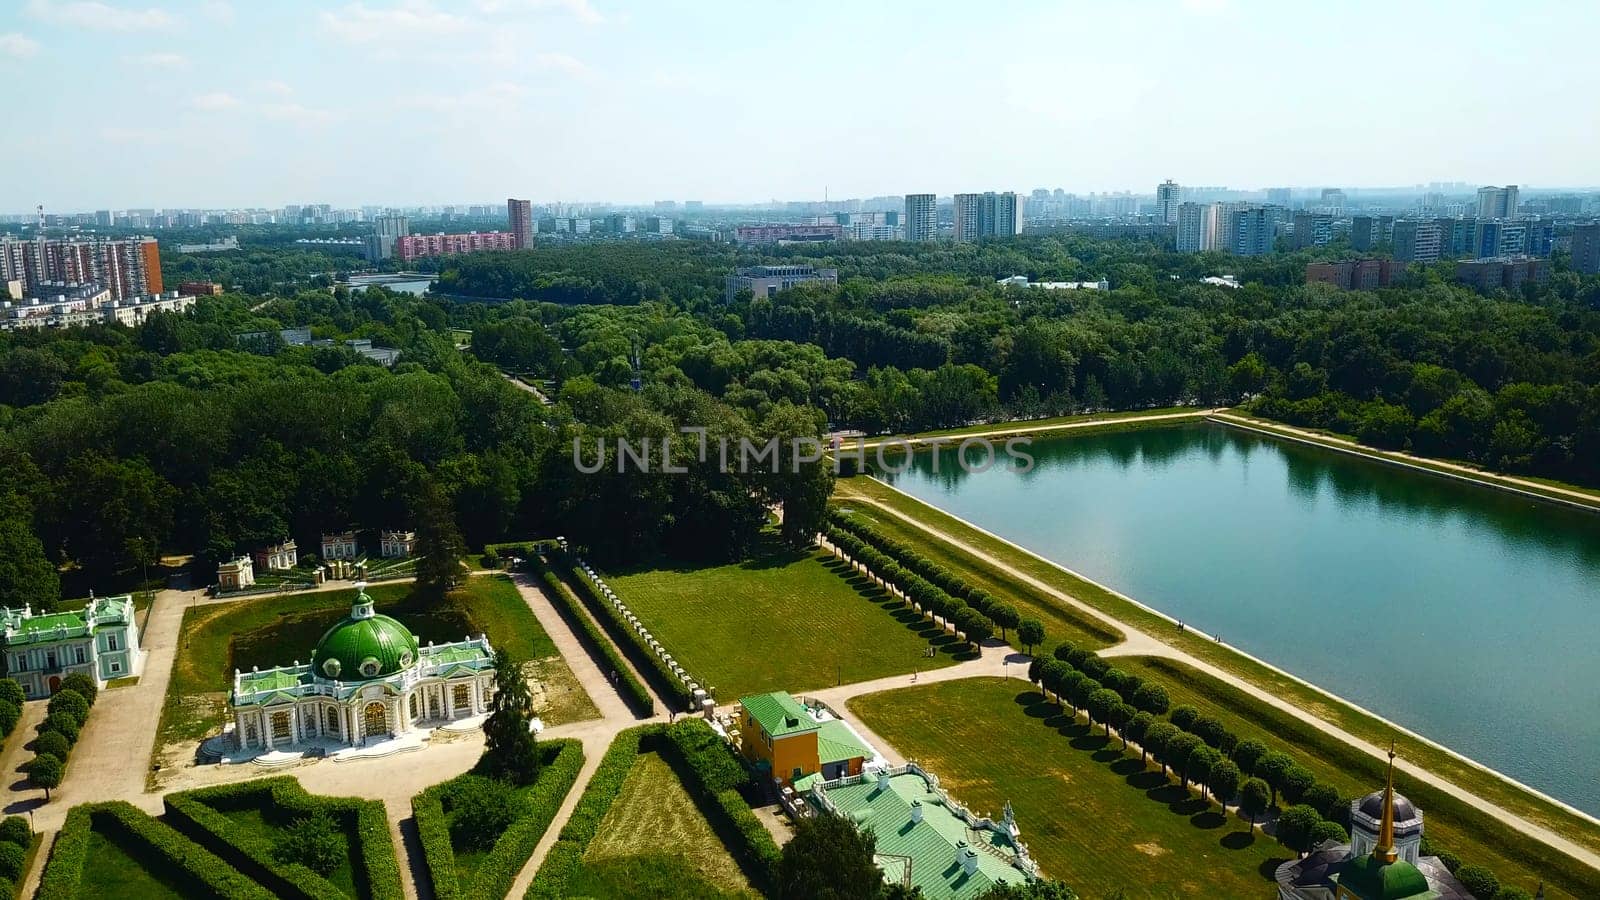 Palace with pond on background of modern city. Creative. Top view of beautiful historical complex on sunny summer day. Palatial buildings with garden and pond with contrast of modern city on horizon by Mediawhalestock